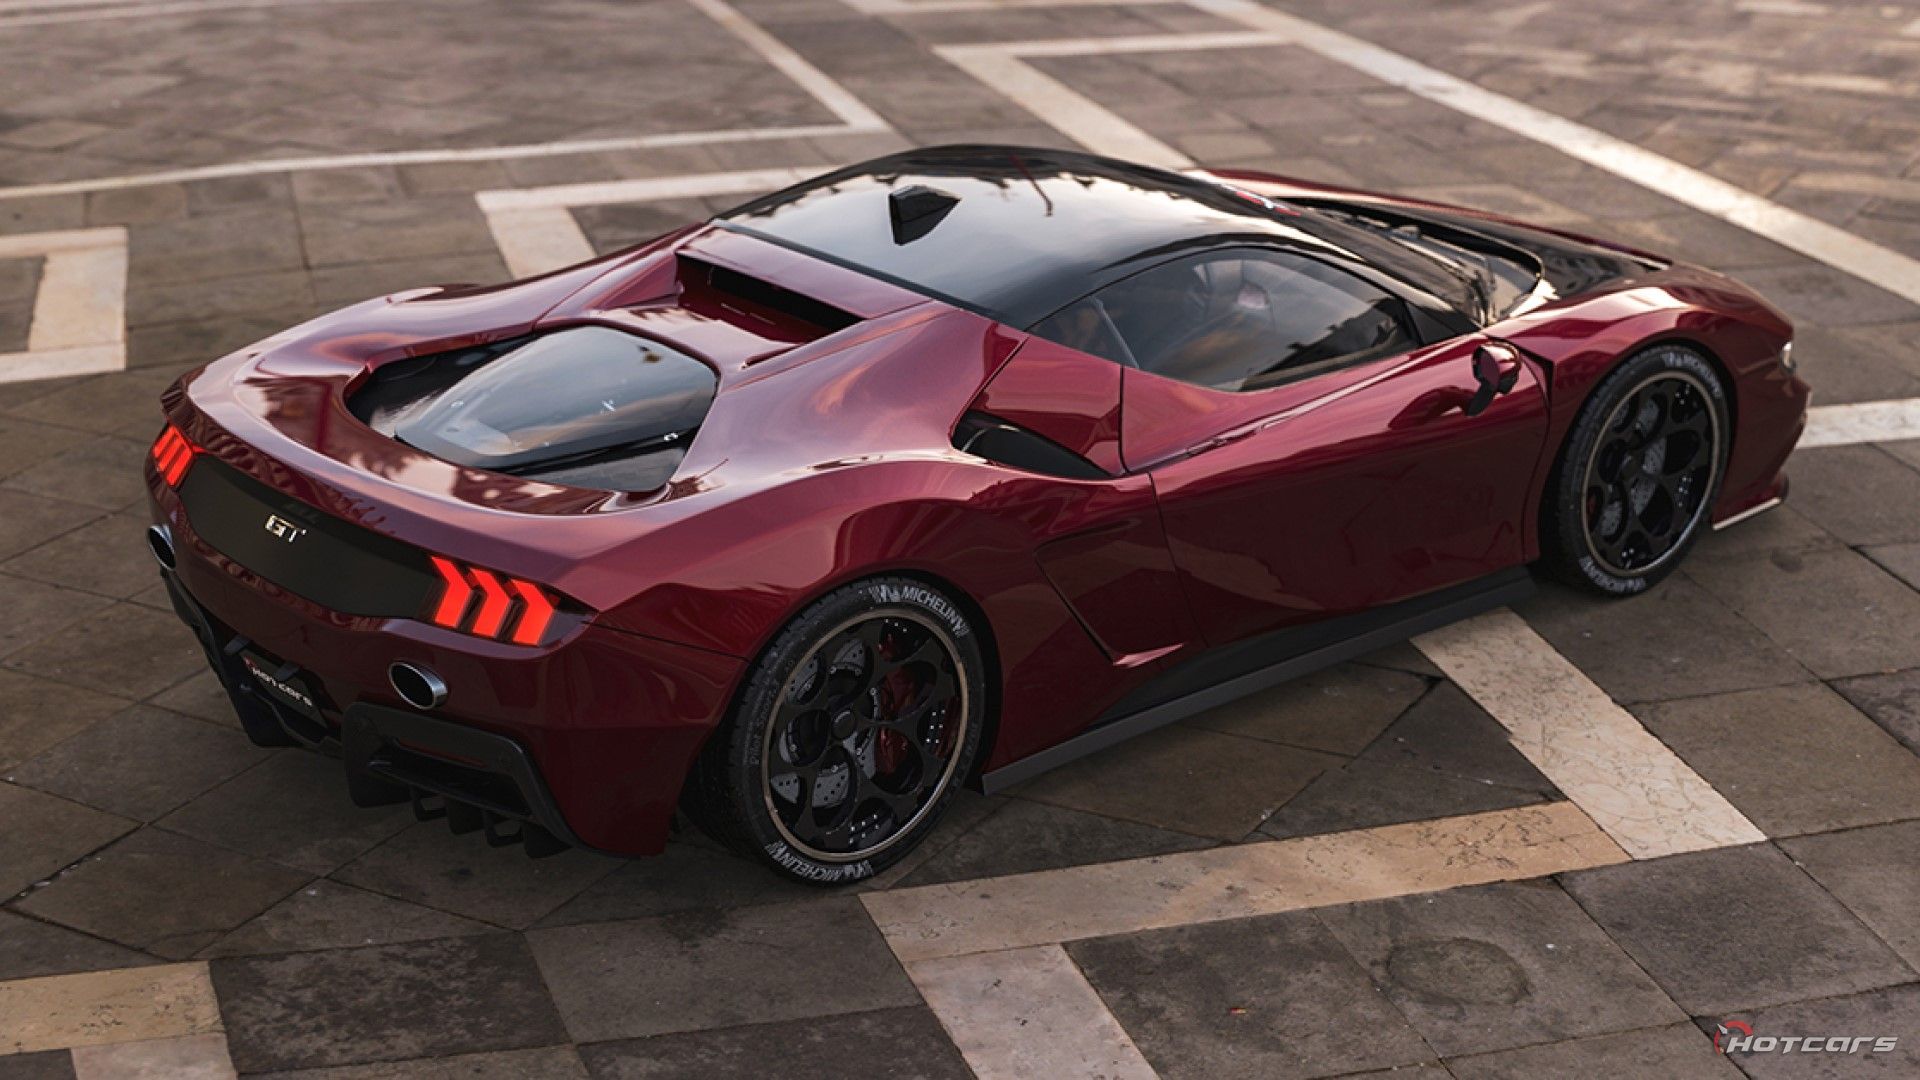 HotCars Car Renders Ferrari-Inspired Ford Mustang, rear quarter view from above